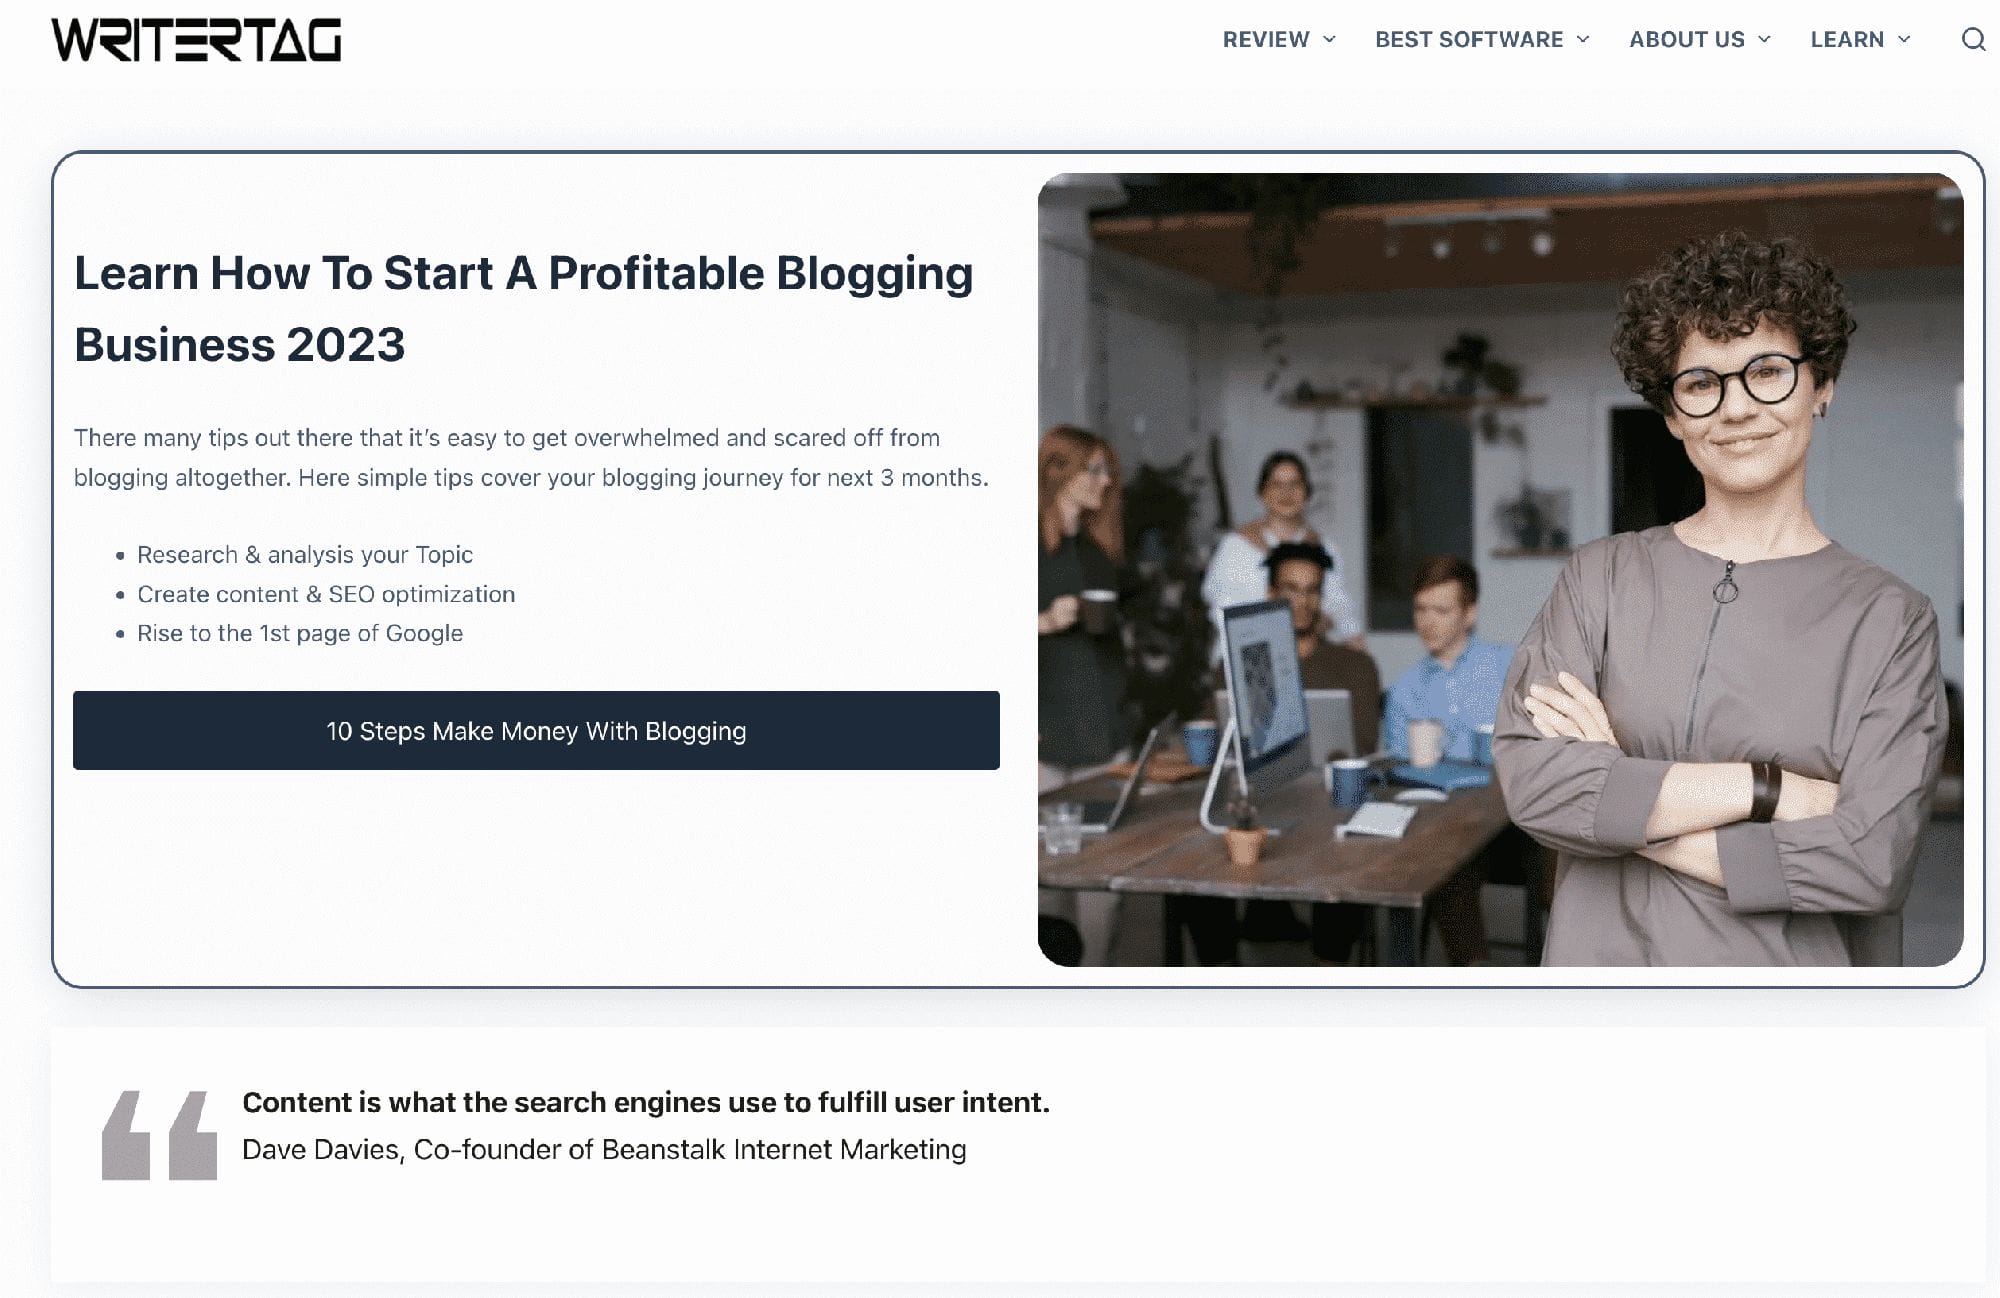 How To Start A Profitable Blogging Business By Boosting Blog Traffic Through Rebranding.